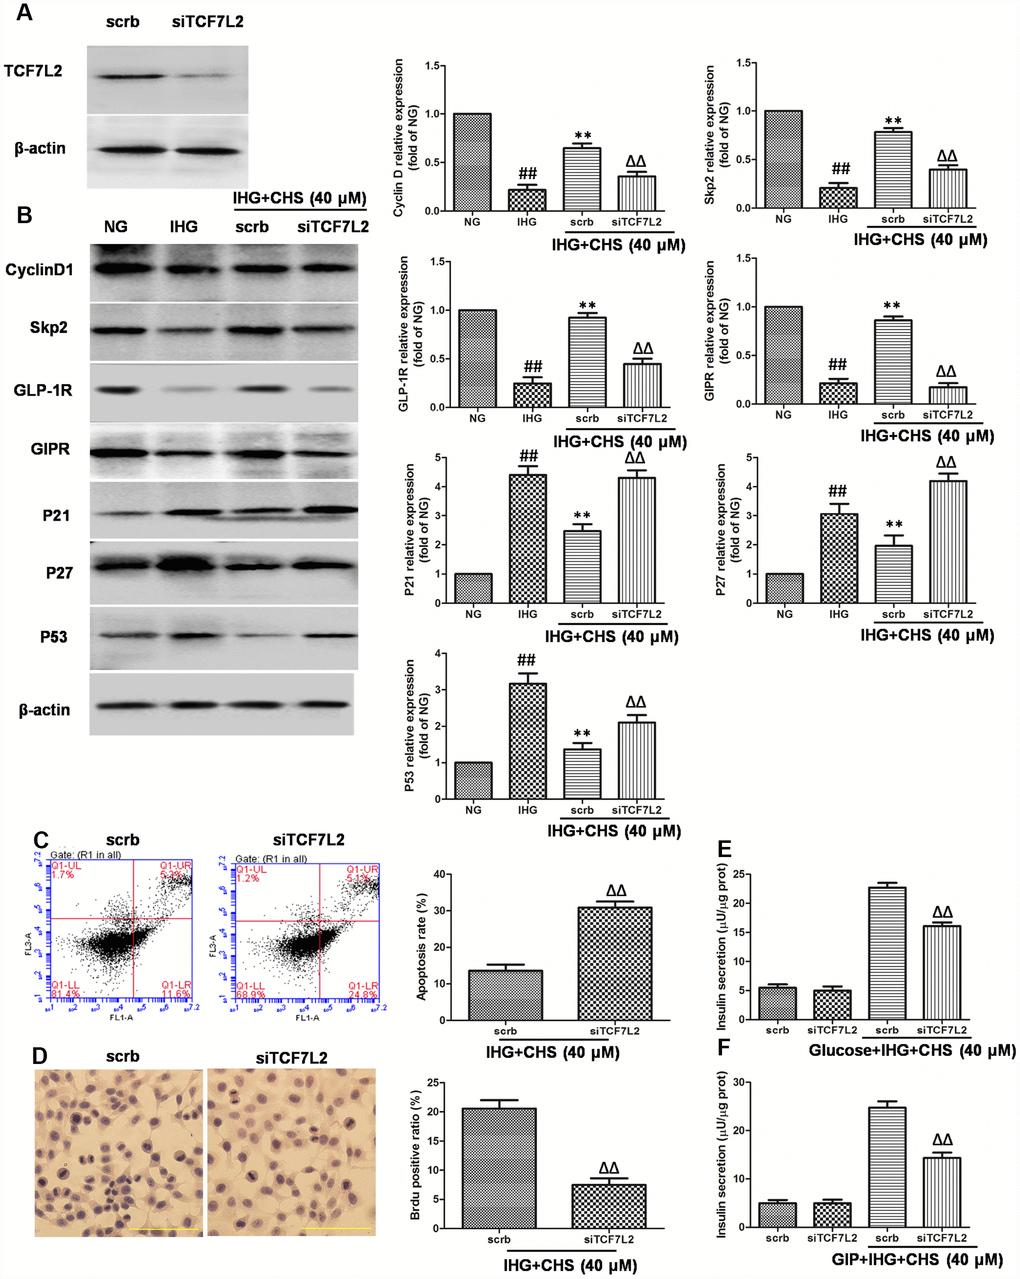 Effects of CHS might through TCF7L2 pathway. (A) The protein expression of TCF7L2 after siRNA transfection target TCF7L2. (B) The protein expression levels of TCF7L2 downstream proteins after inhibition of TCF7L2 by TCF7L2 siRNA. (C) The apoptosis rate of βTC3 cell was measured by flow cytometry after inhibition of TCF7L2 by TCF7L2 siRNA. (D) The BrdU immunohistochemical staining was performed after inhibition of TCF7L2 by TCF7L2 siRNA. (E) The effects of siTCF7L2 on the glucose induced insulin secretion. (F) The effects of siTCF7L2 on the GLP-1 induced insulin secretion. Data are representative of three independent experiments. ##P**PΔΔP